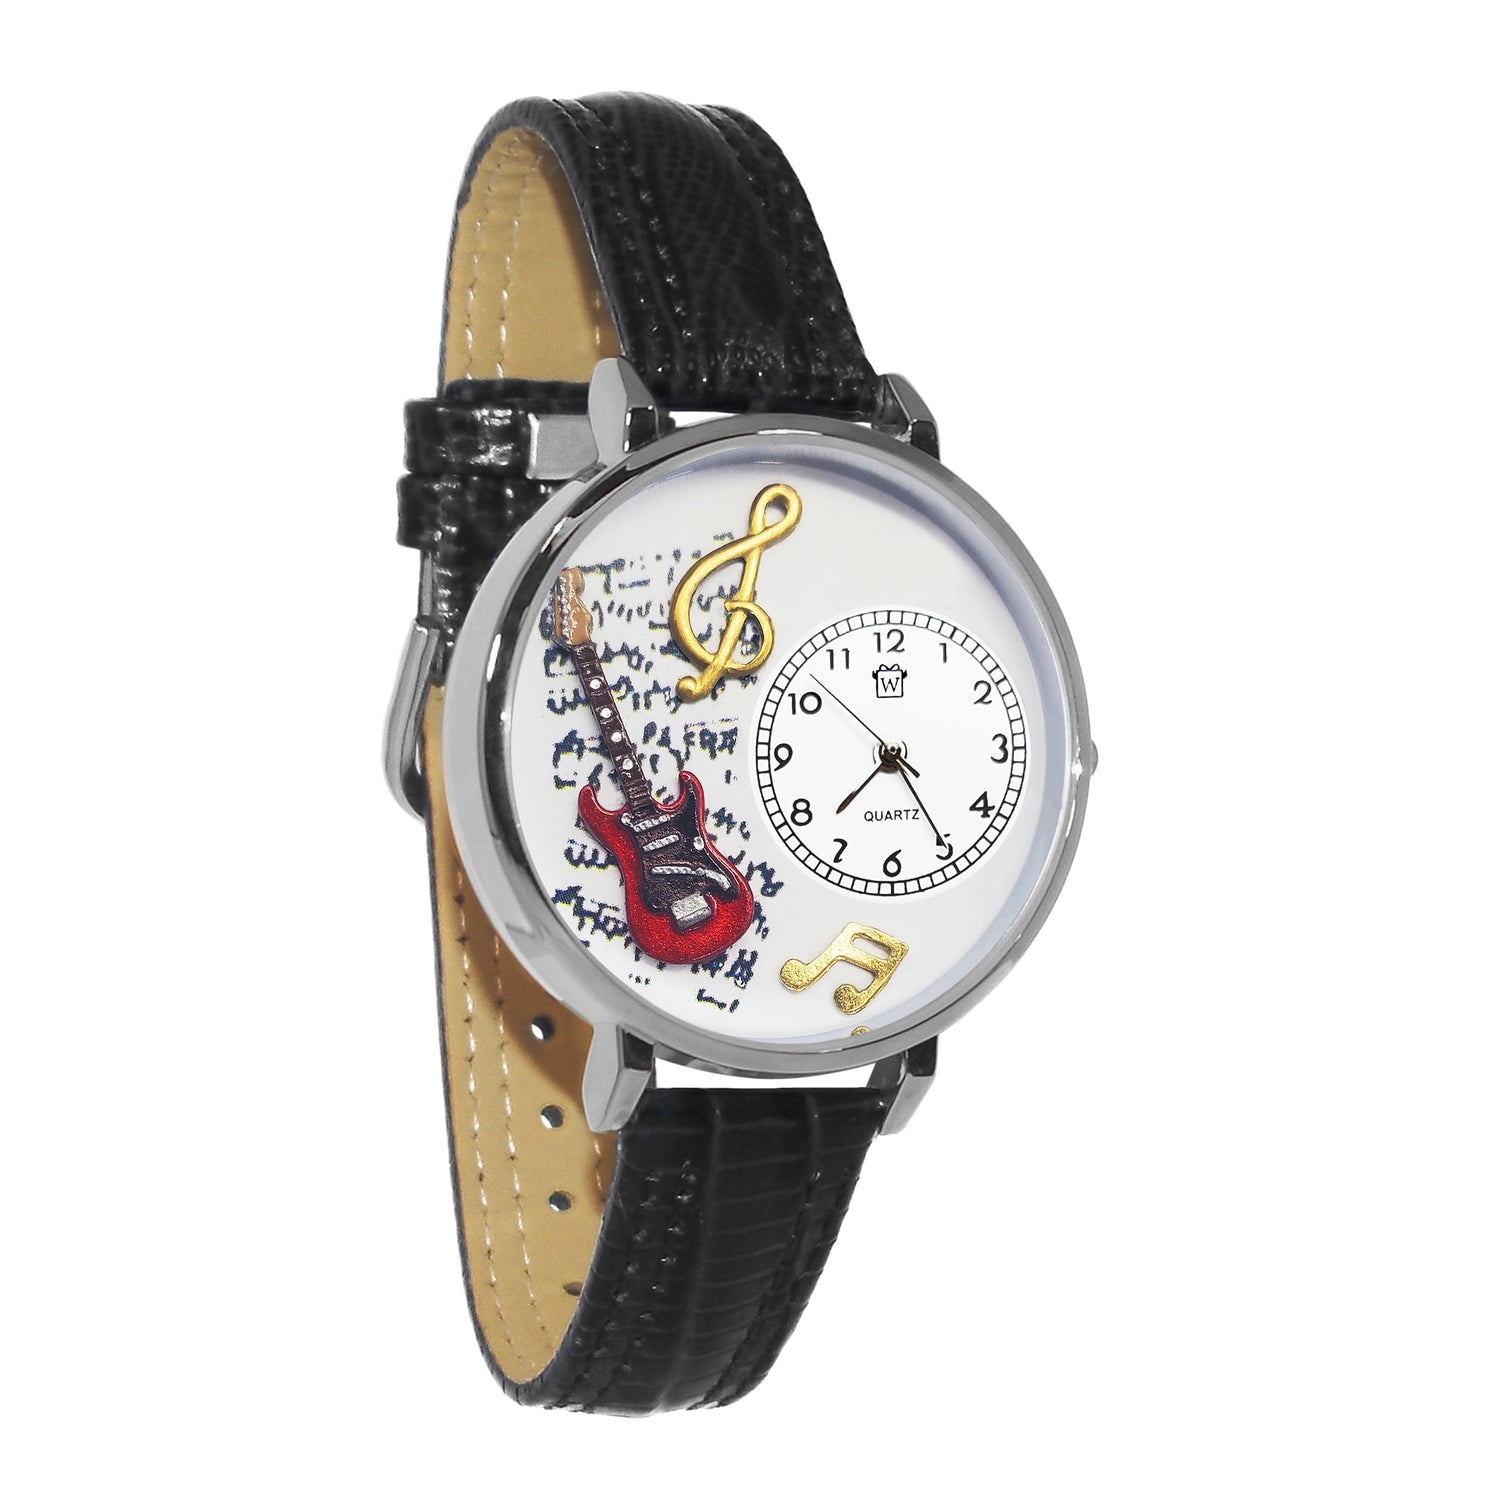 Whimsical Gifts | Electric Guitar 3D Watch Large Style | Handmade in USA | Hobbies & Special Interests | Music | Novelty Unique Fun Miniatures Gift | Silver Finish Black Leather Watch Band